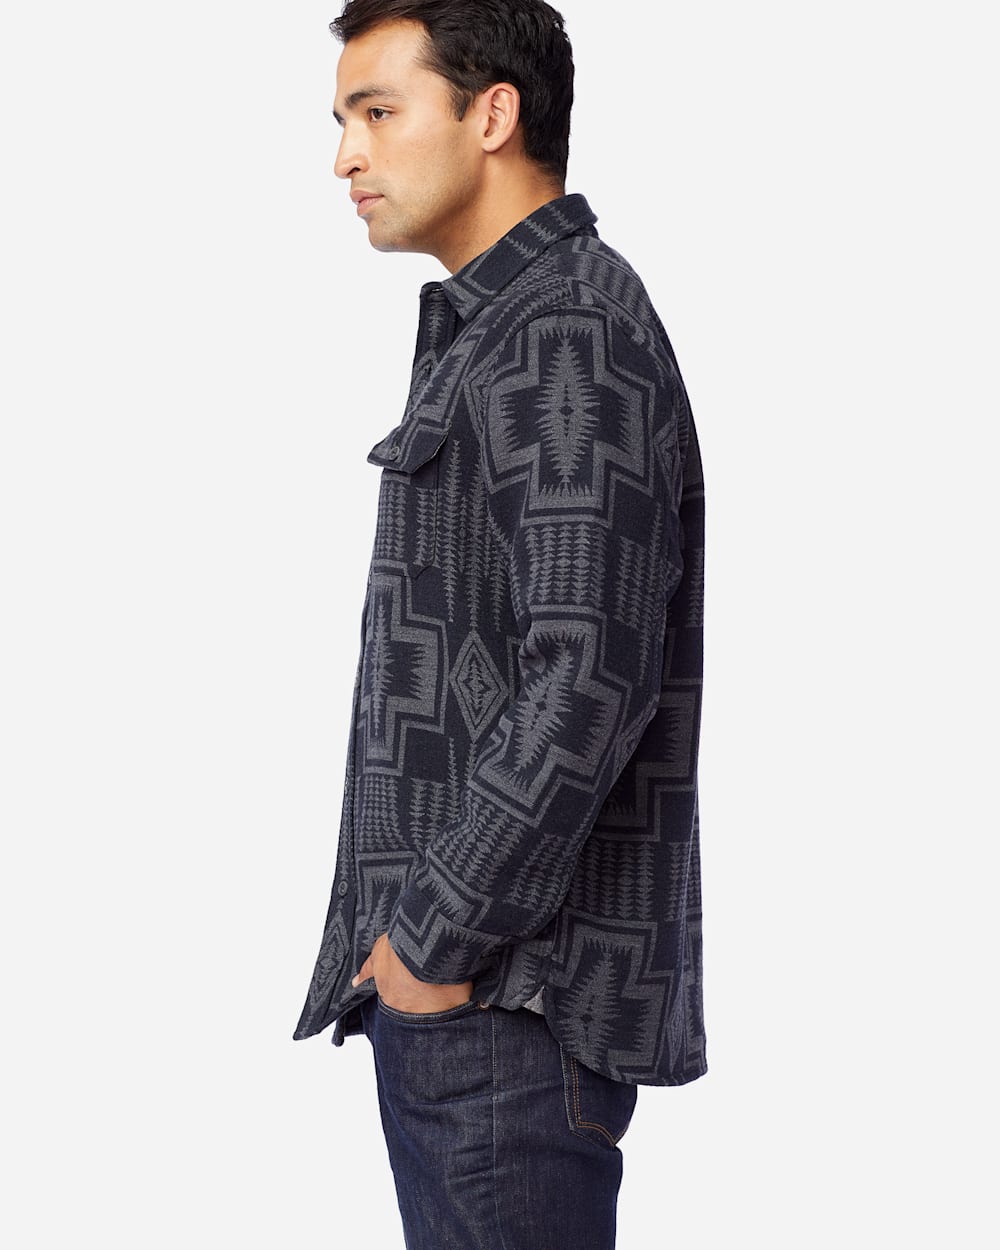 ALTERNATE VIEW OF MEN'S DOUBLESOFT FLANNEL BEACH SHIRT IN BLACK/GREY HARDING image number 2